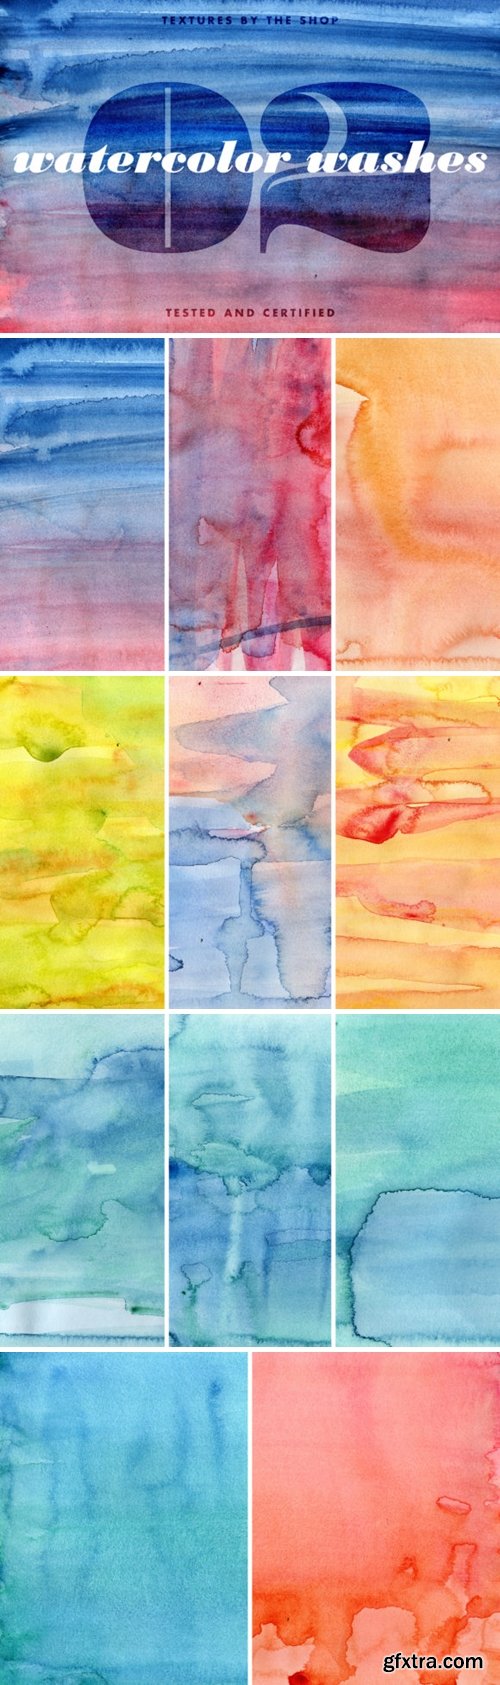 CM - Watercolor washes textures volume 02 227523